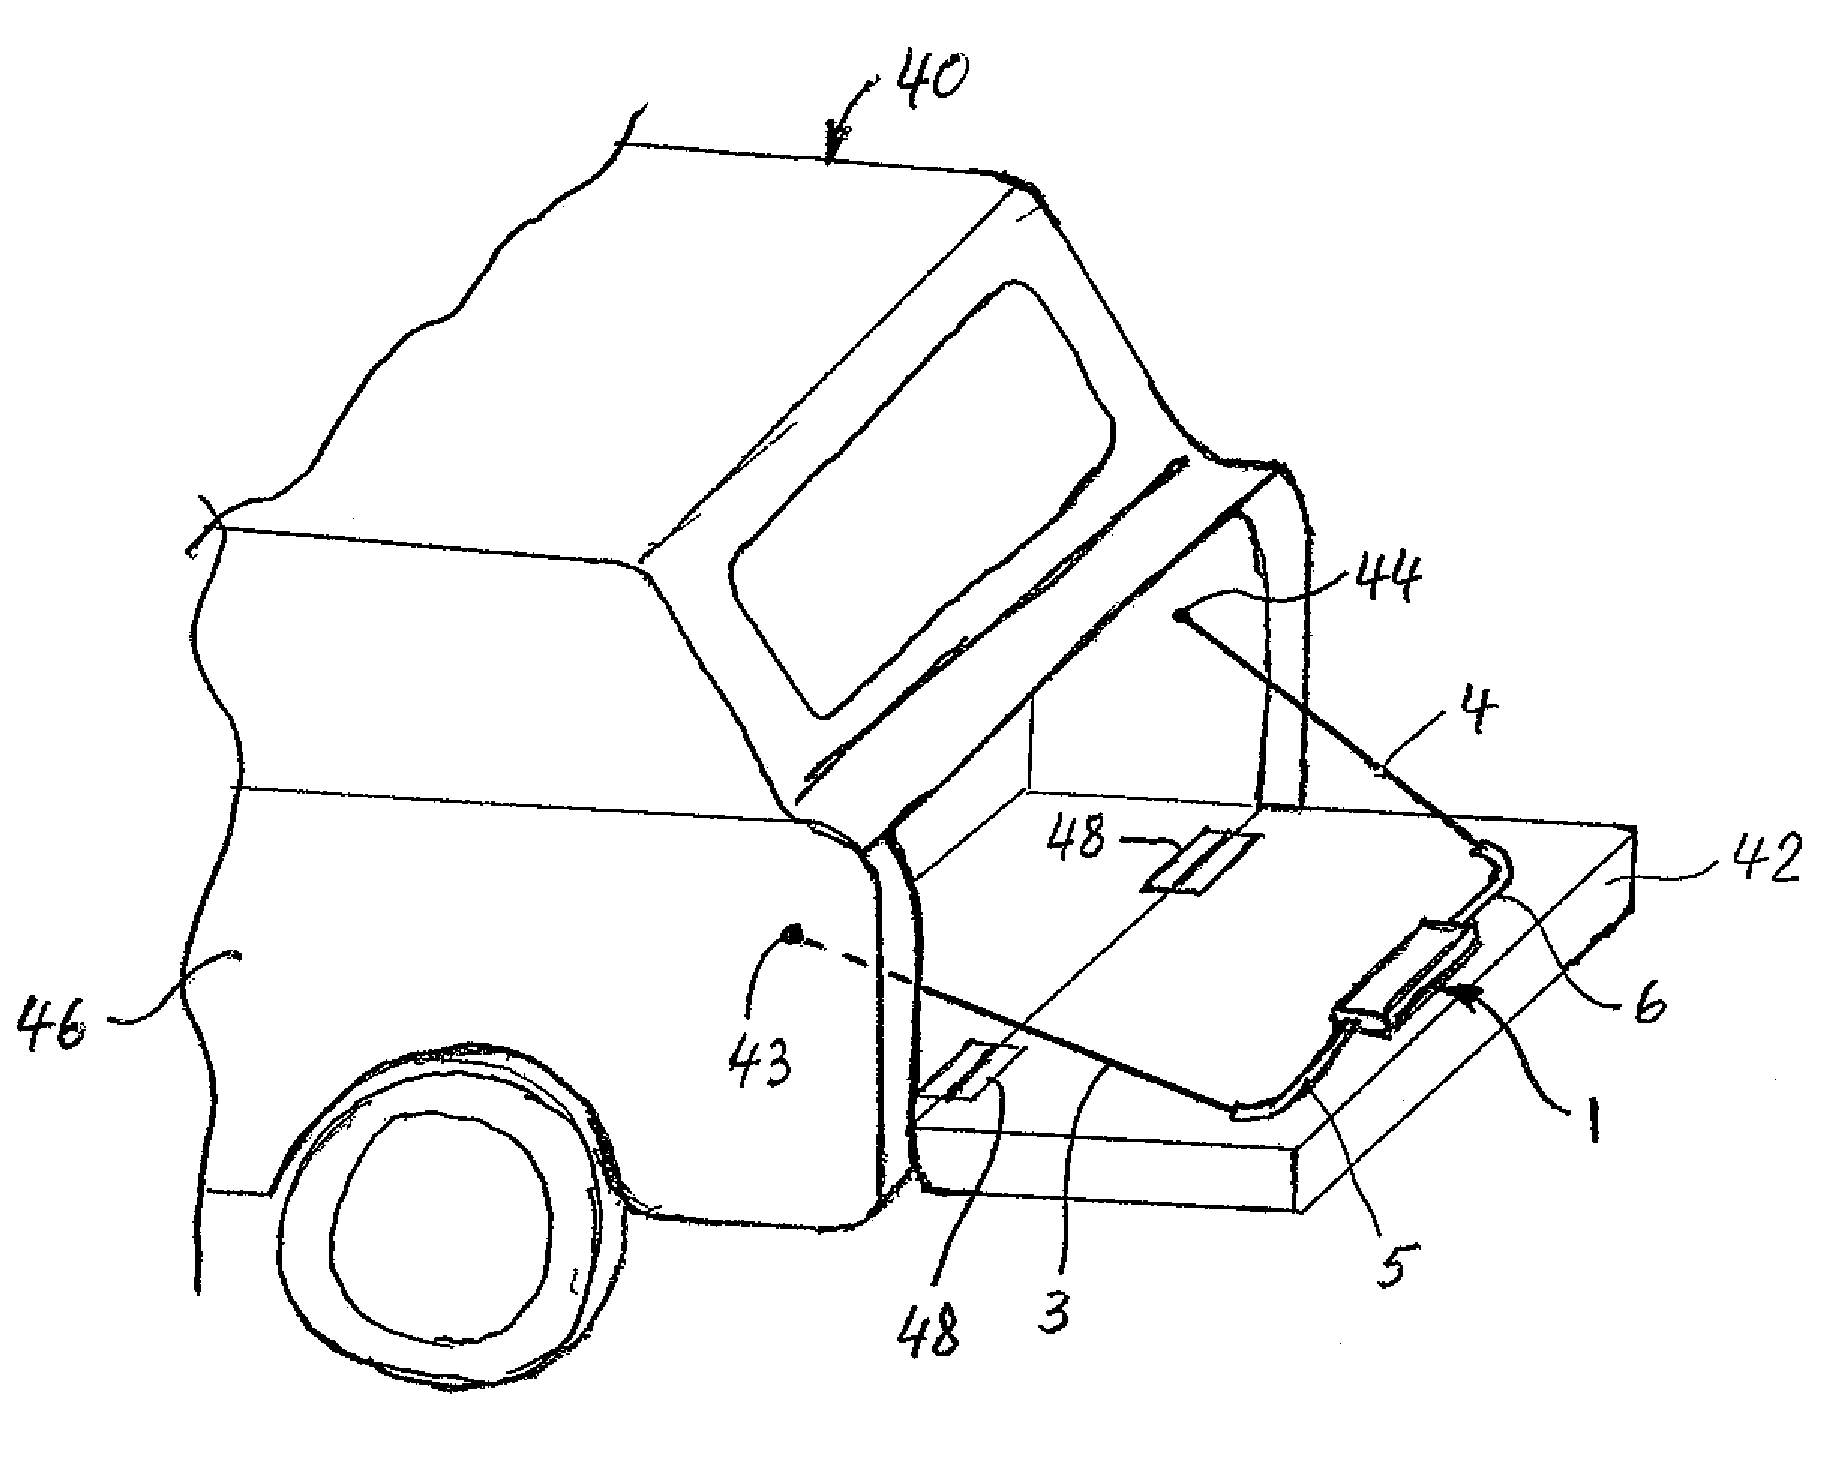 Unit for synchronous extension and retraction of two wire segments, and a motor vehicle having such a unit